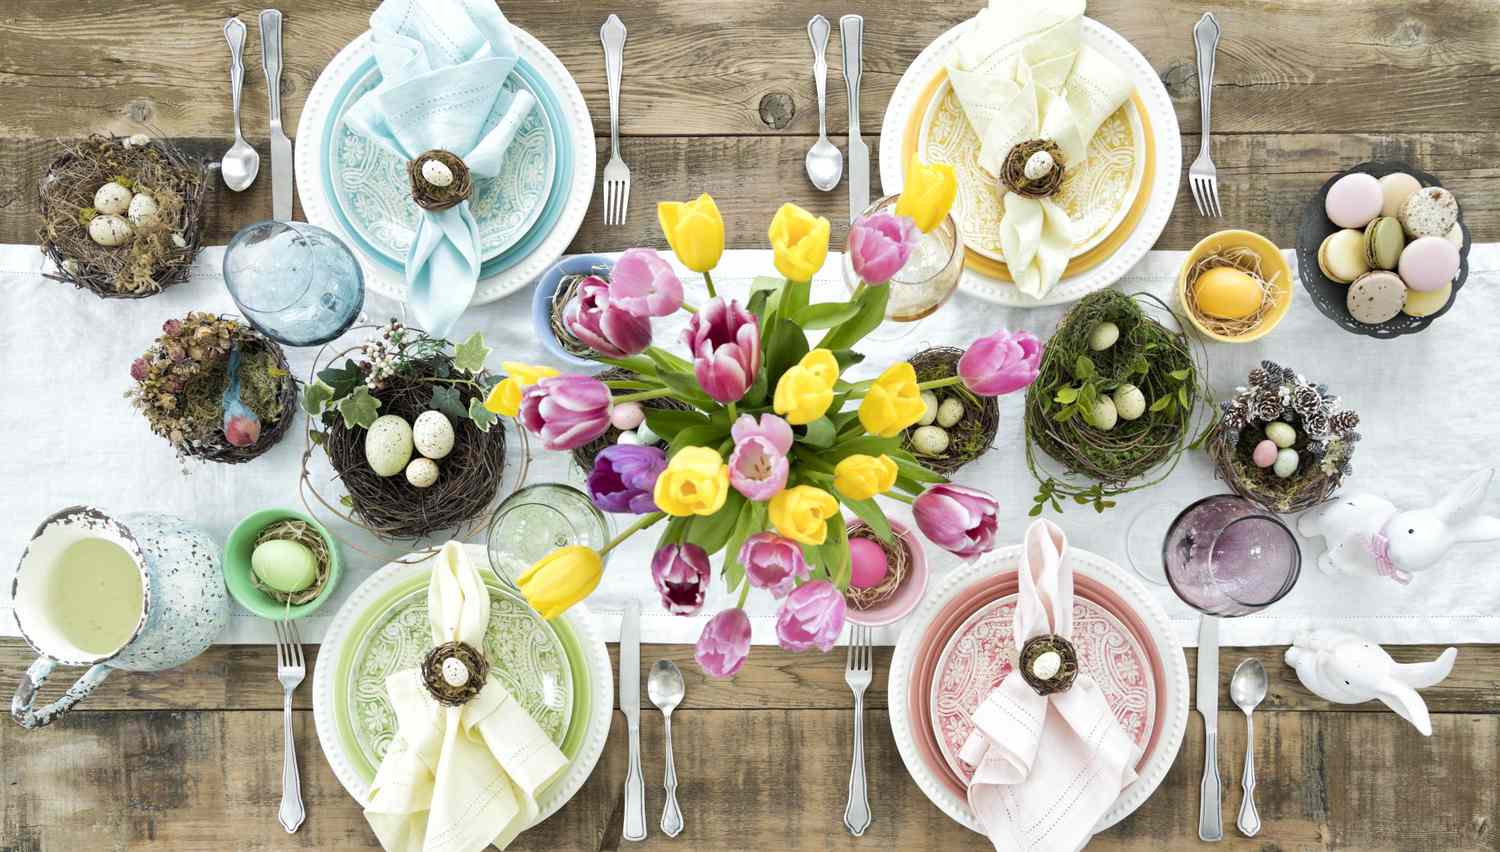 Style at Home: Easter brunch at home